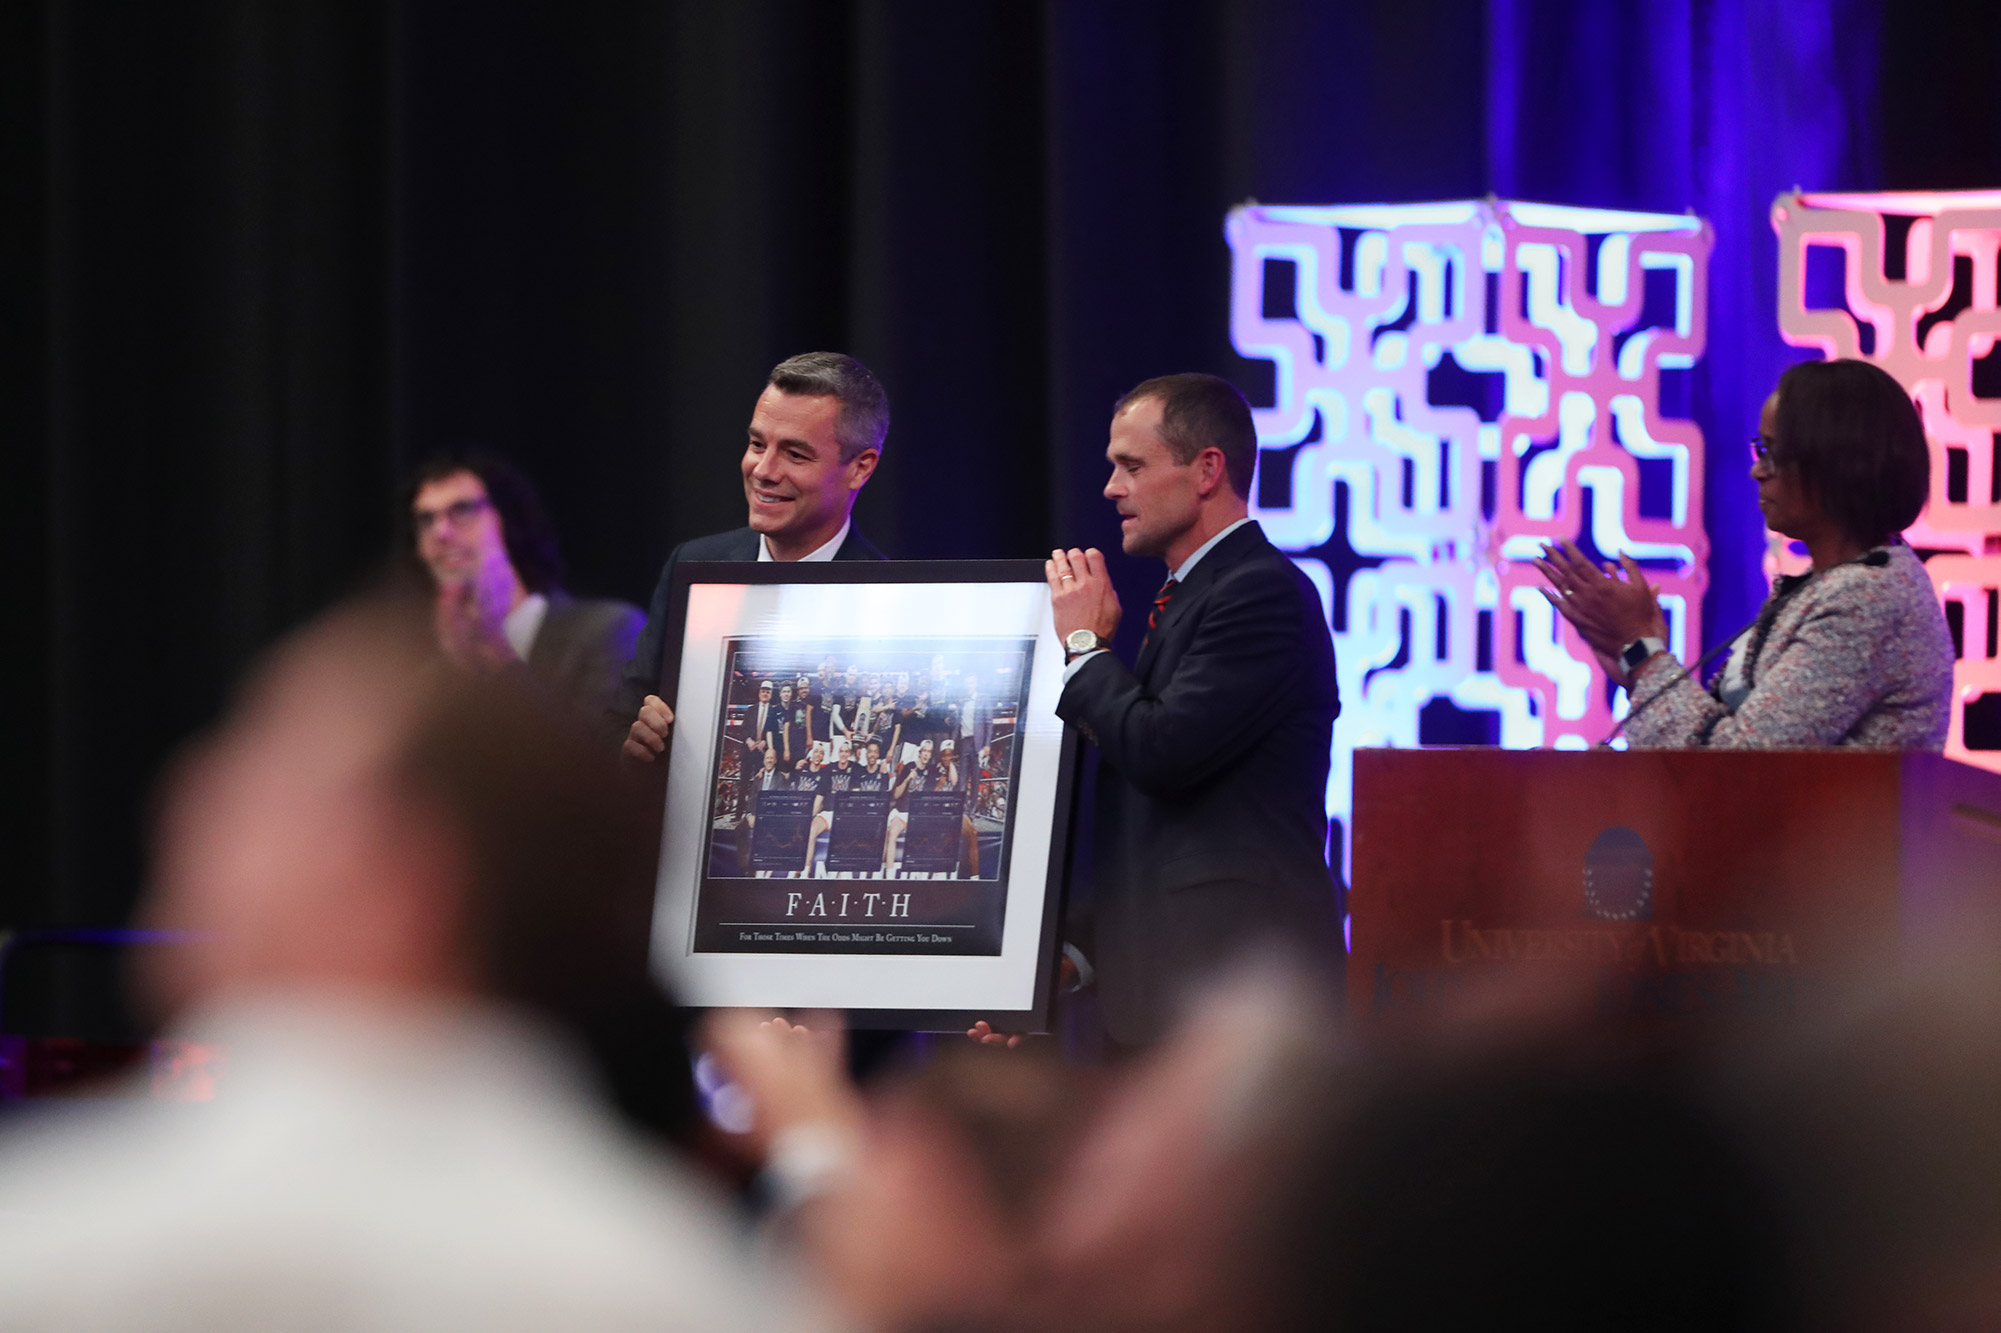 Jim Ryan and Tony Bennett hold a picture together on stage